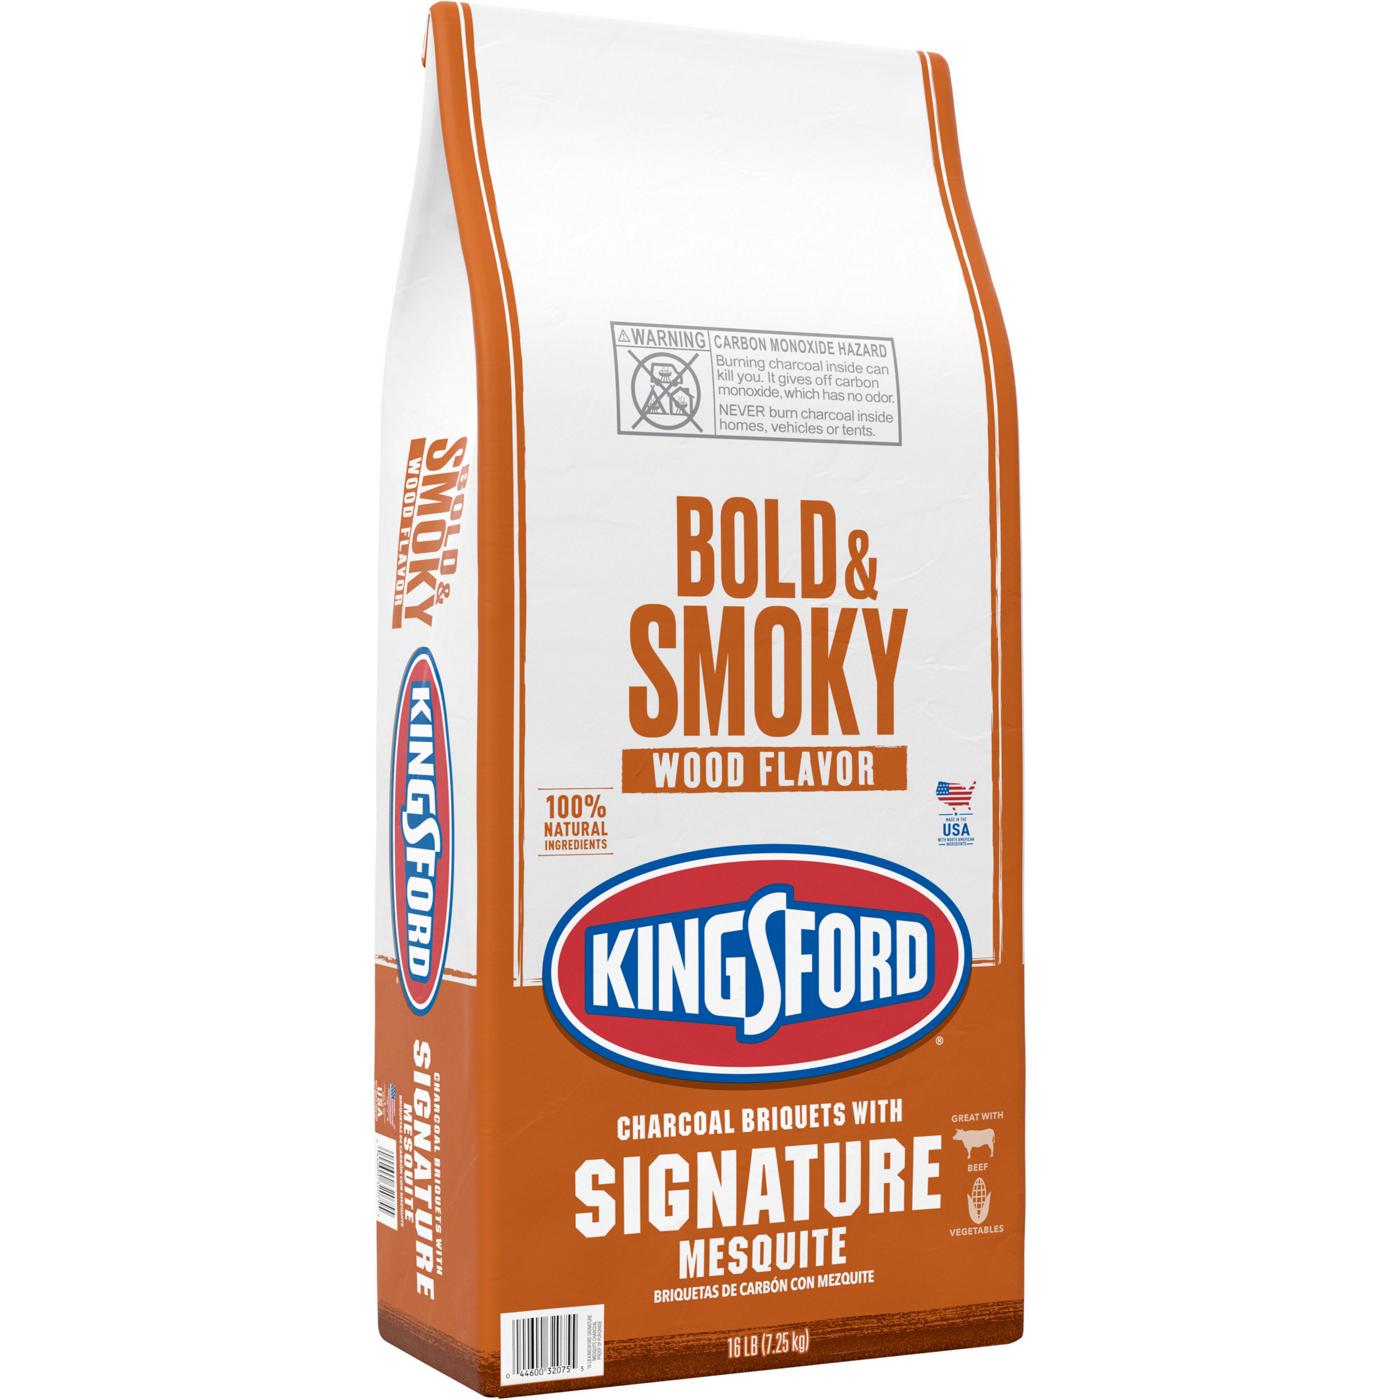 Kingsford Charcoal Briquettes with Signature Mesquite, BBQ Charcoal for Grilling; image 7 of 11